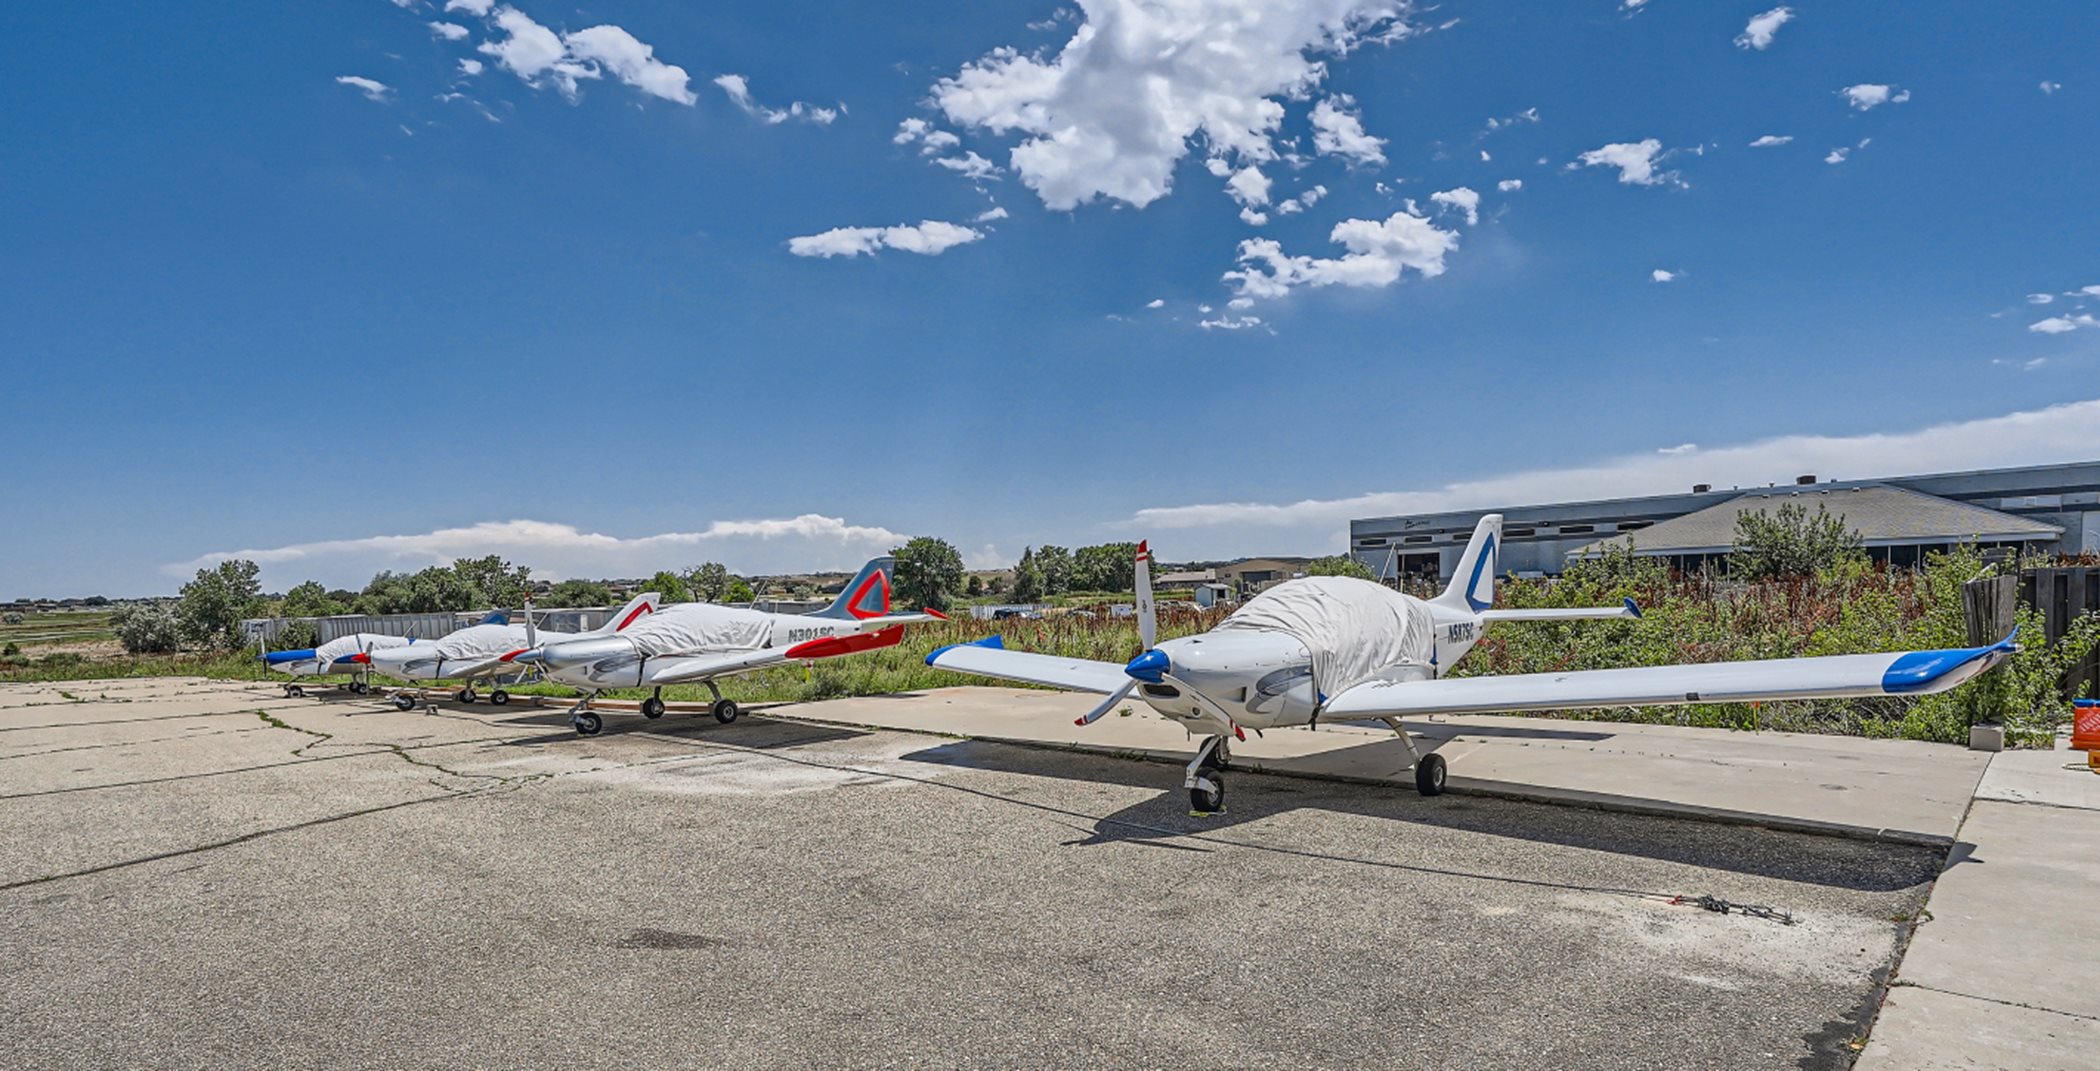 Planes lined up at the Odyssey Pilot School